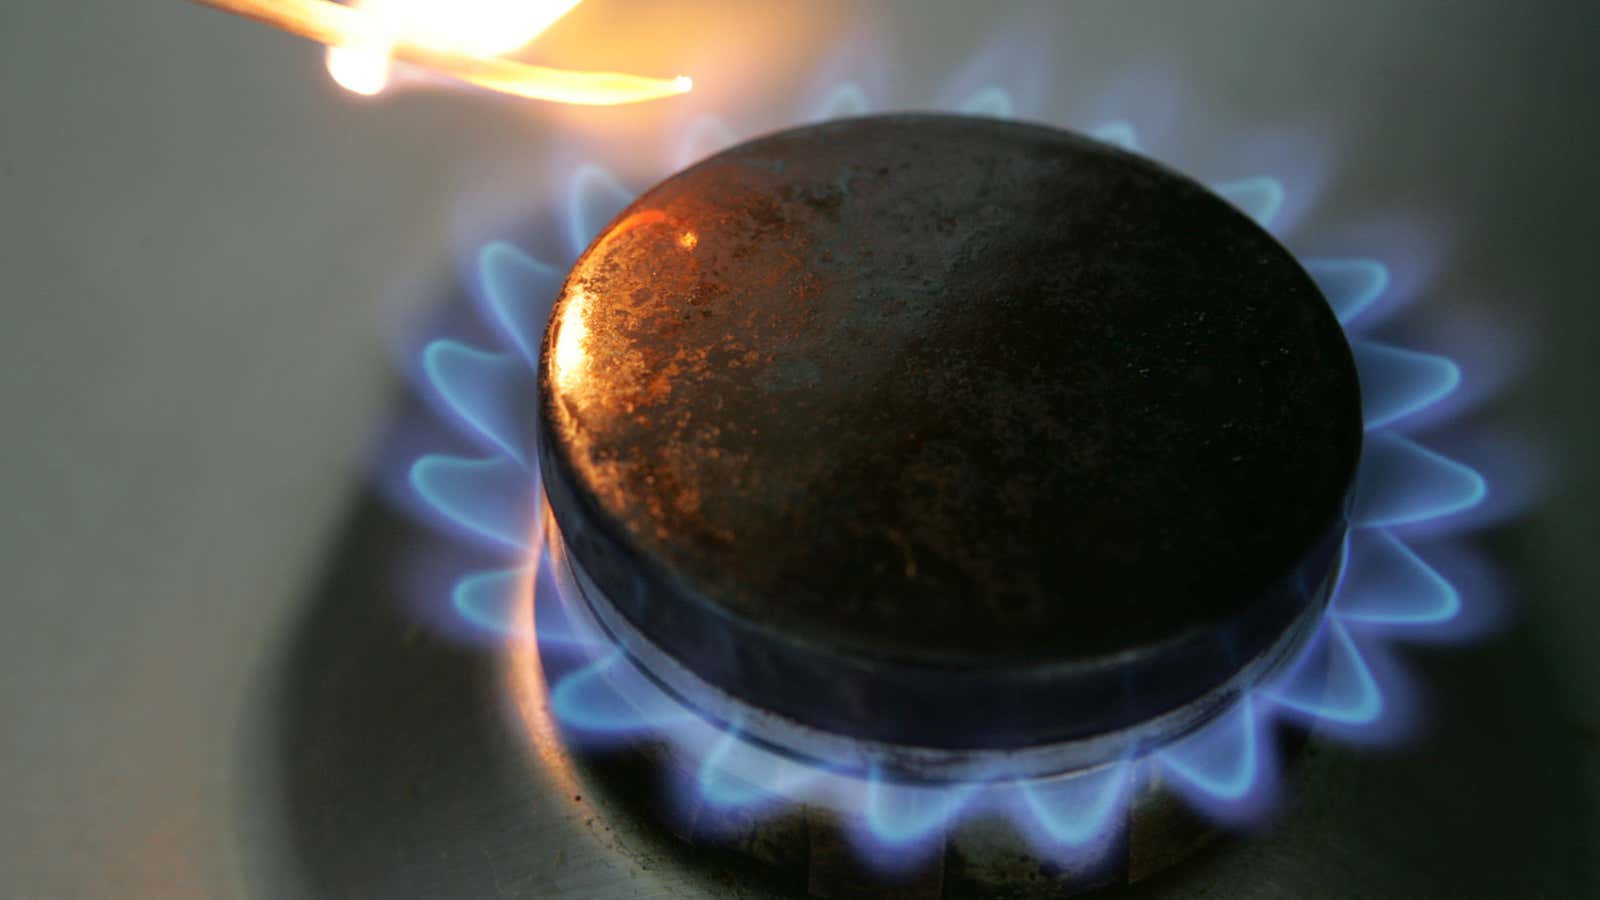 Should Gas Stoves Be Banned? This Study Shows Their Potential Harm